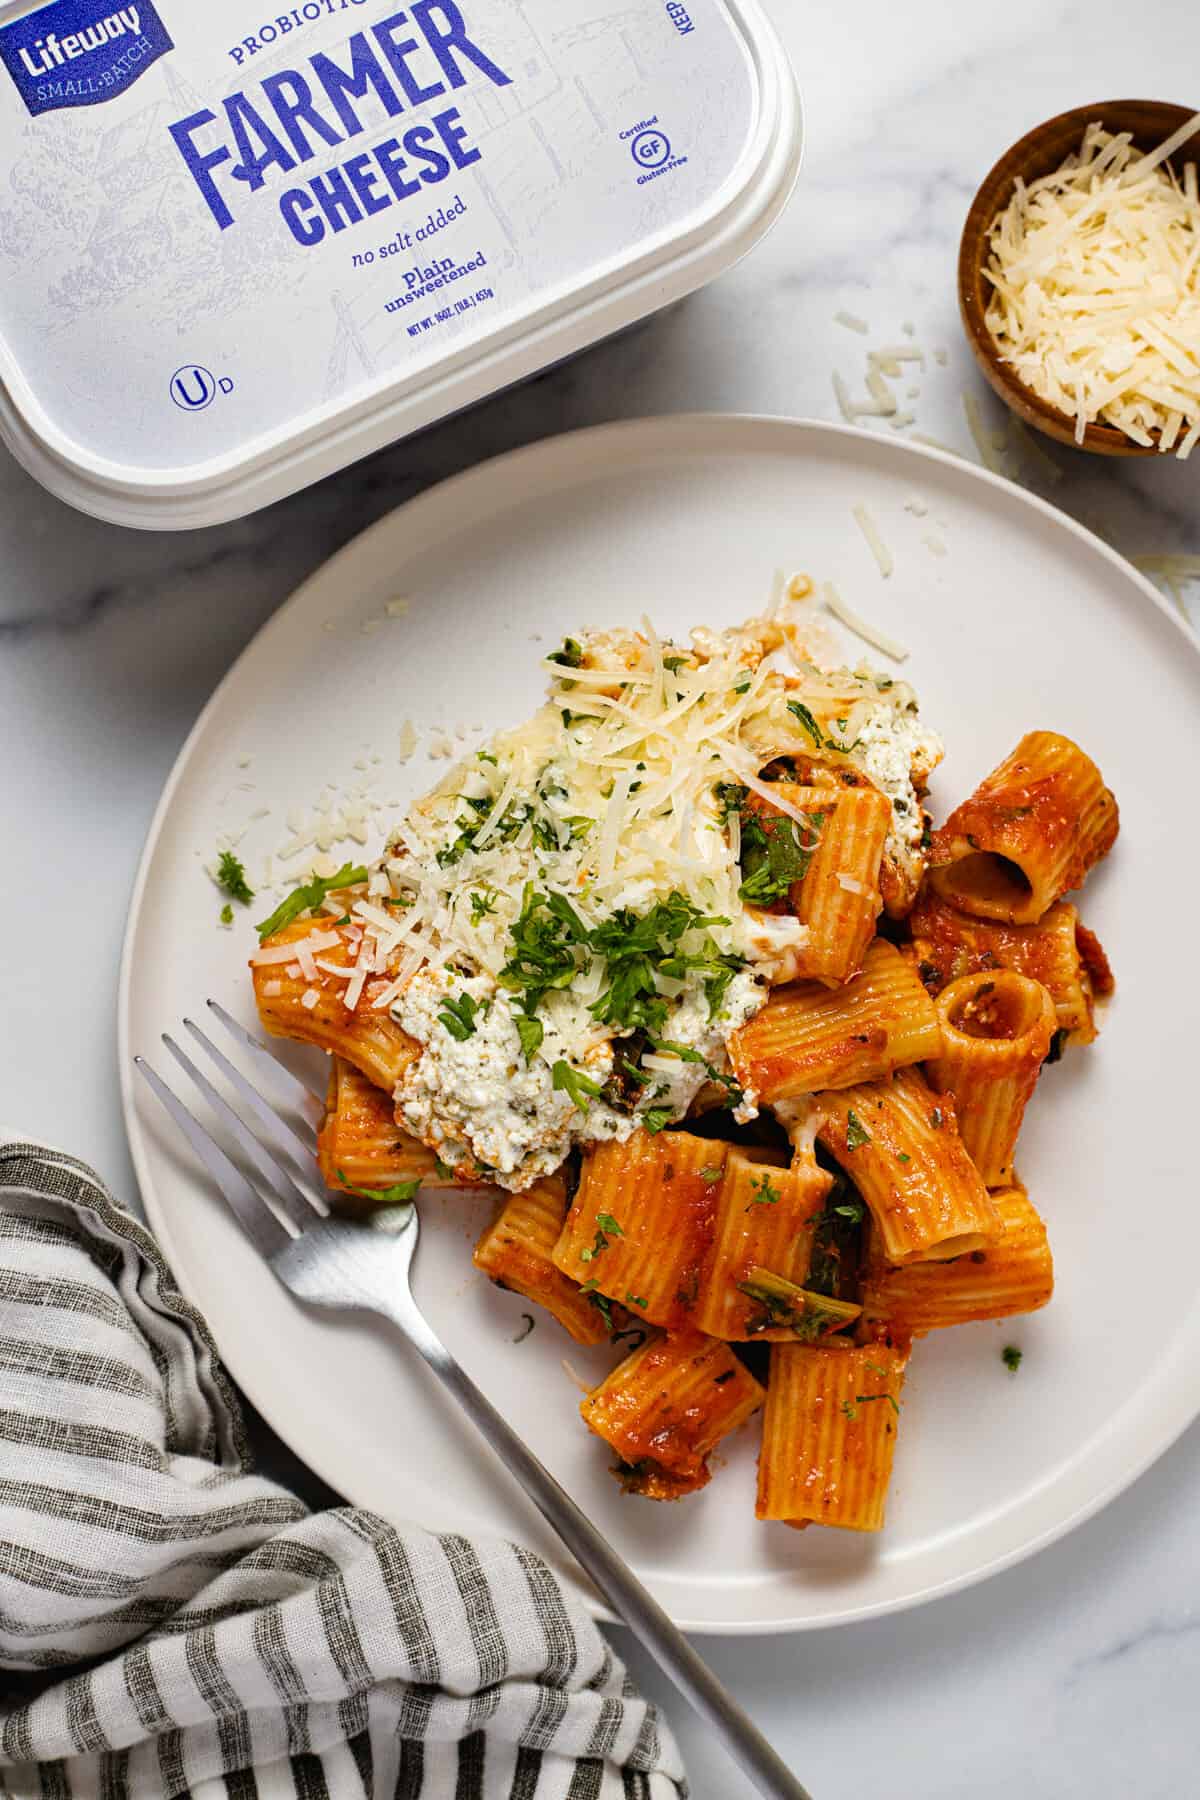 Large white plate filled with baked rigatoni garnished with parsley and Parmesan